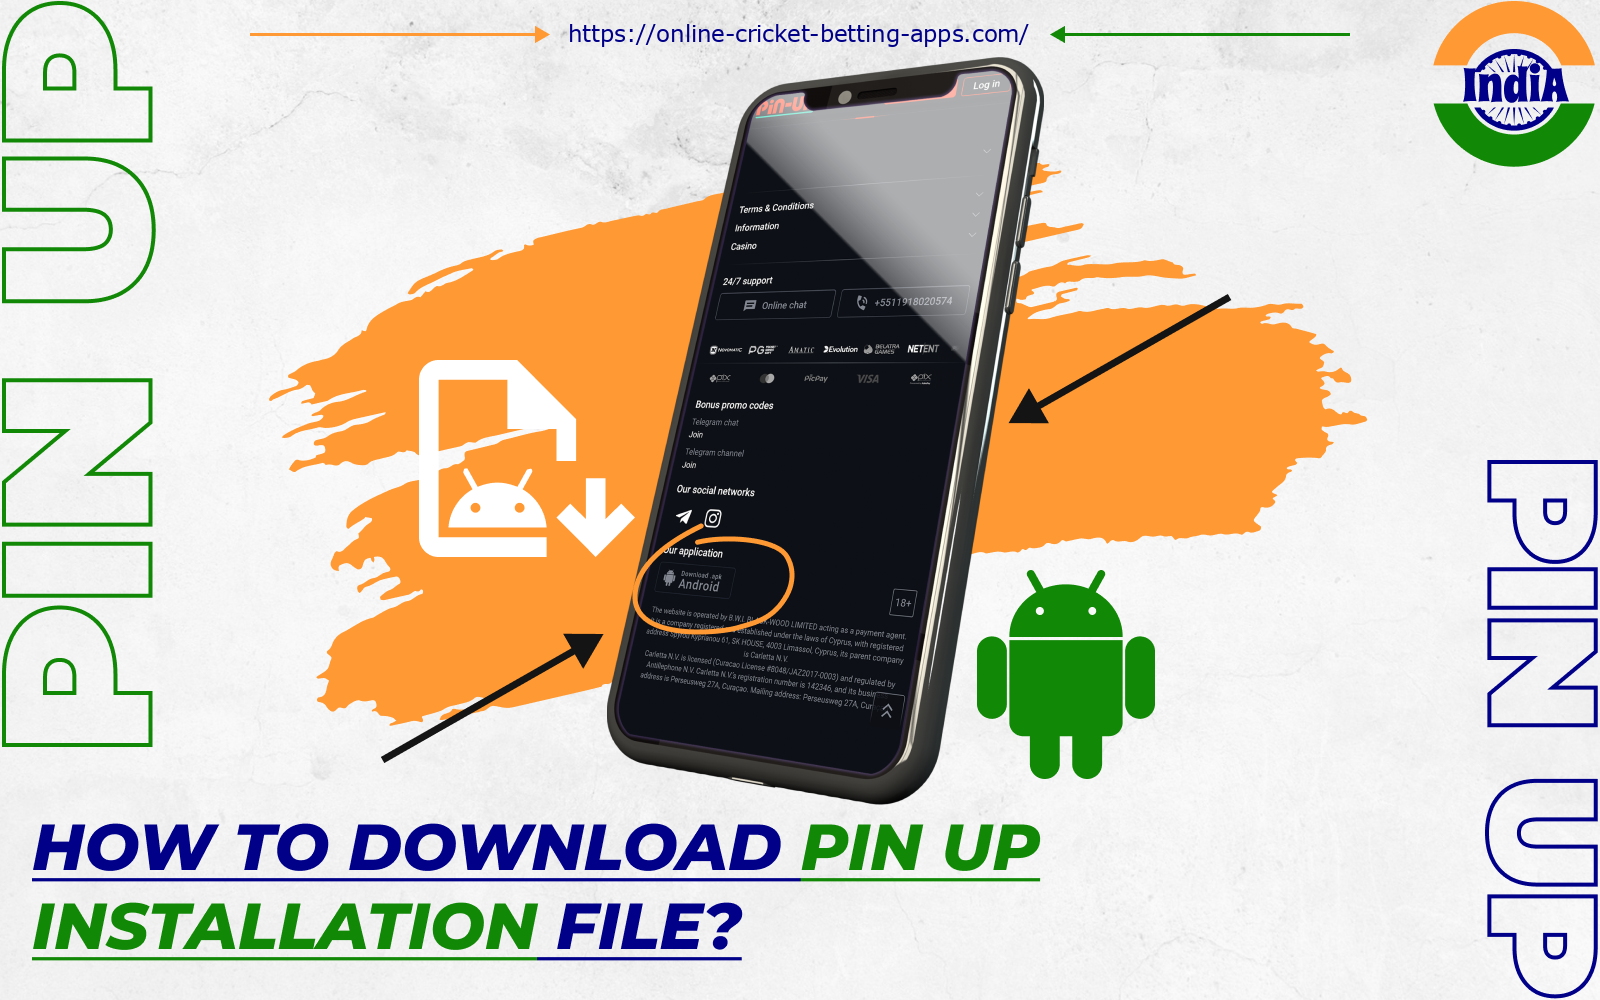 In order to install the PinUp app on their Android device, players from India first need to download the installation file